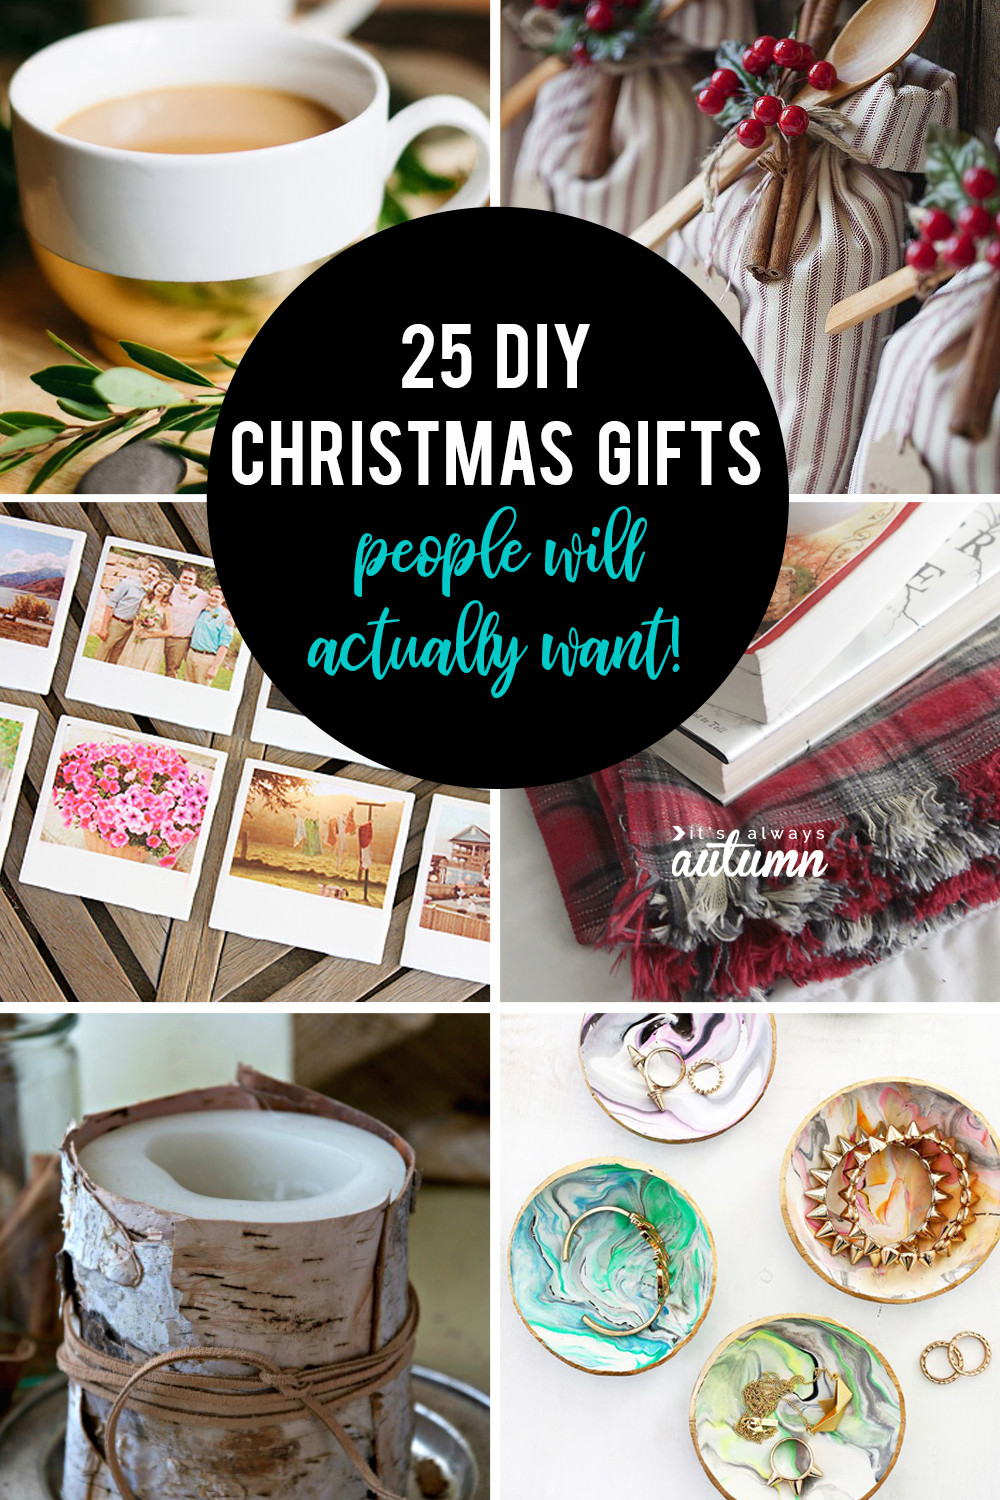 Christmas Gift Ideas DIY
 25 amazing DIY ts people will actually want It s